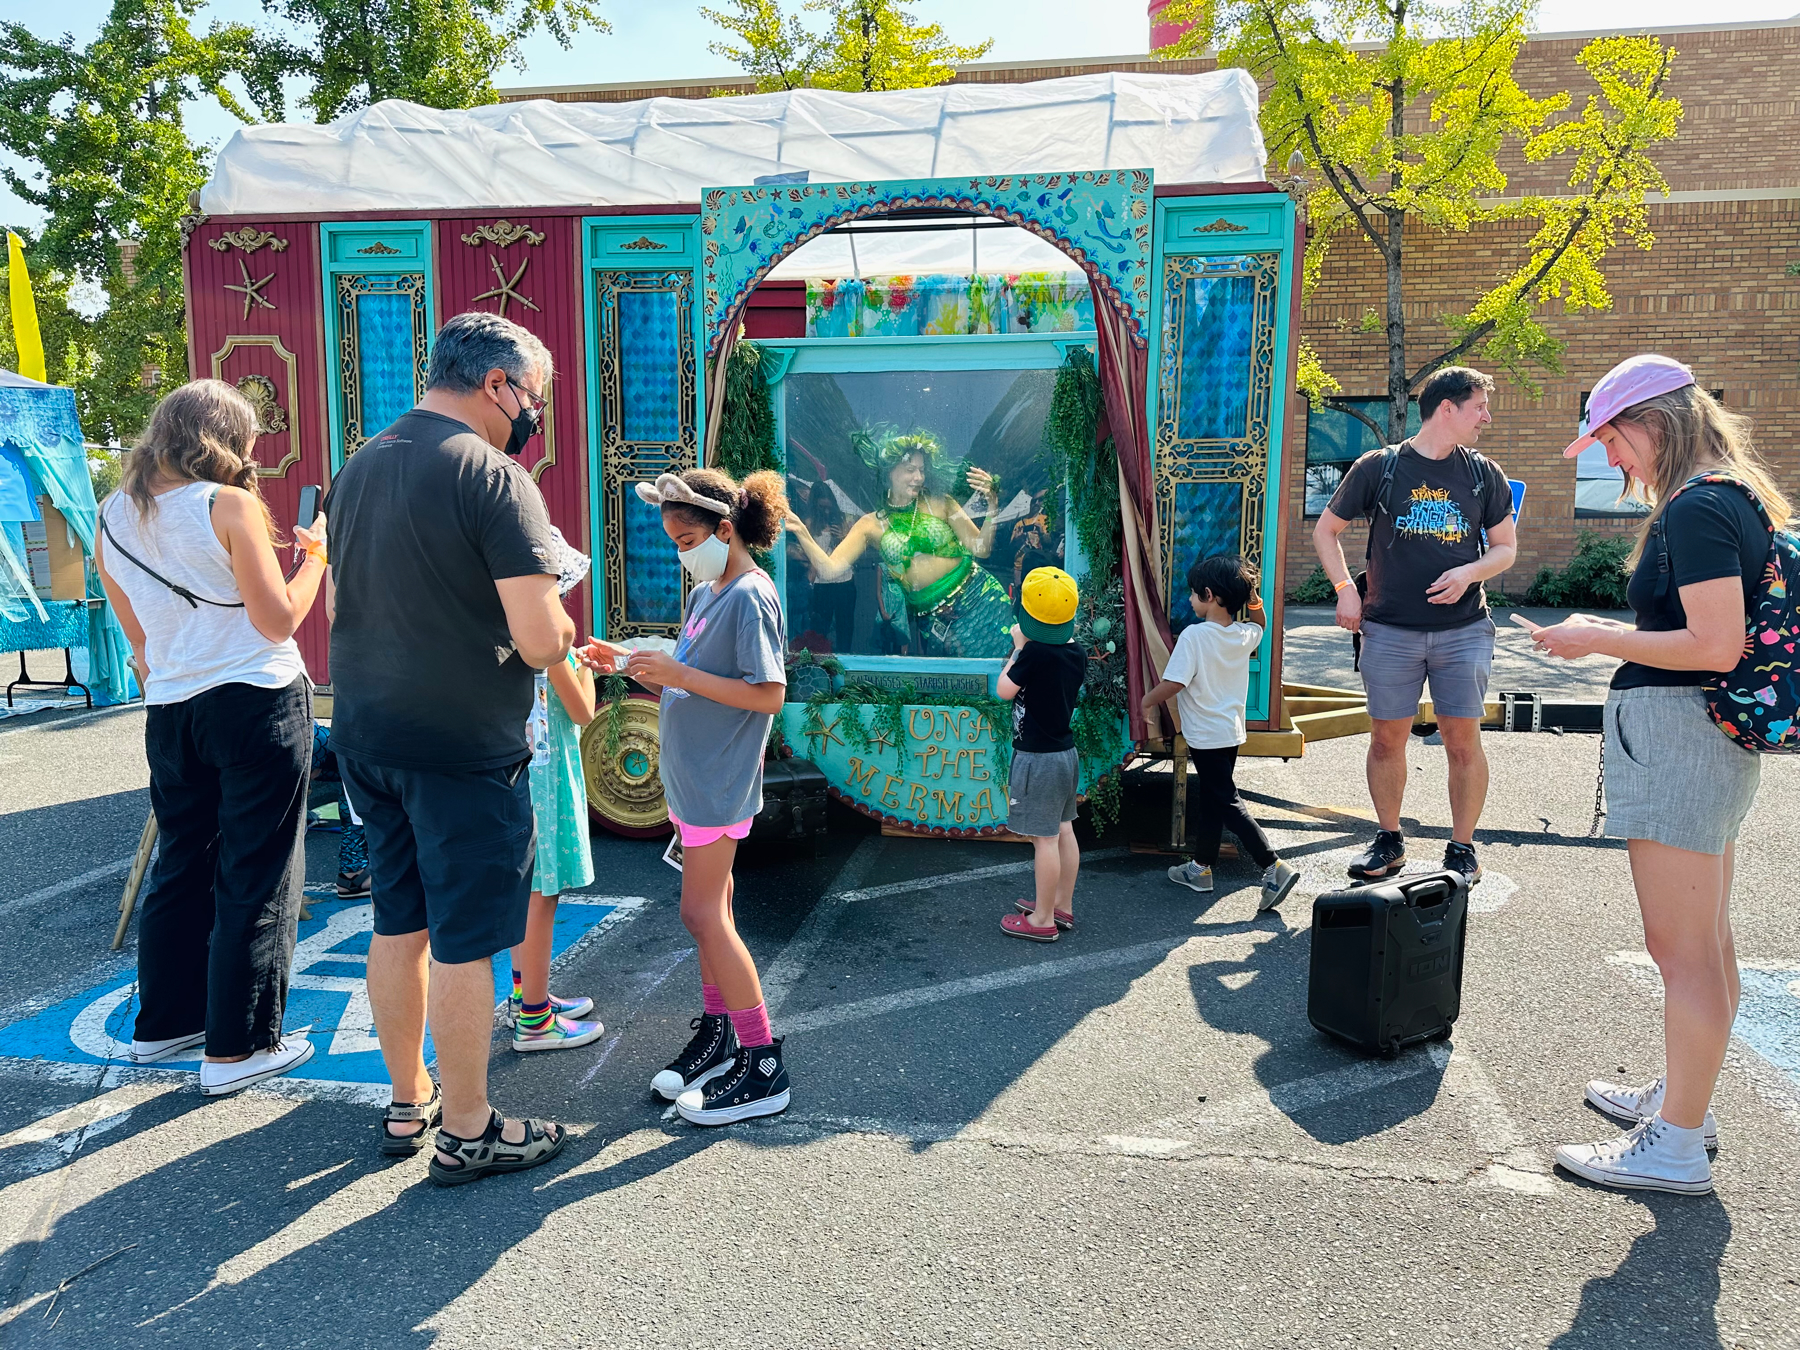 People standing next to a van that has a large window with a water tank and a woman dressed as a mermaid inside it.